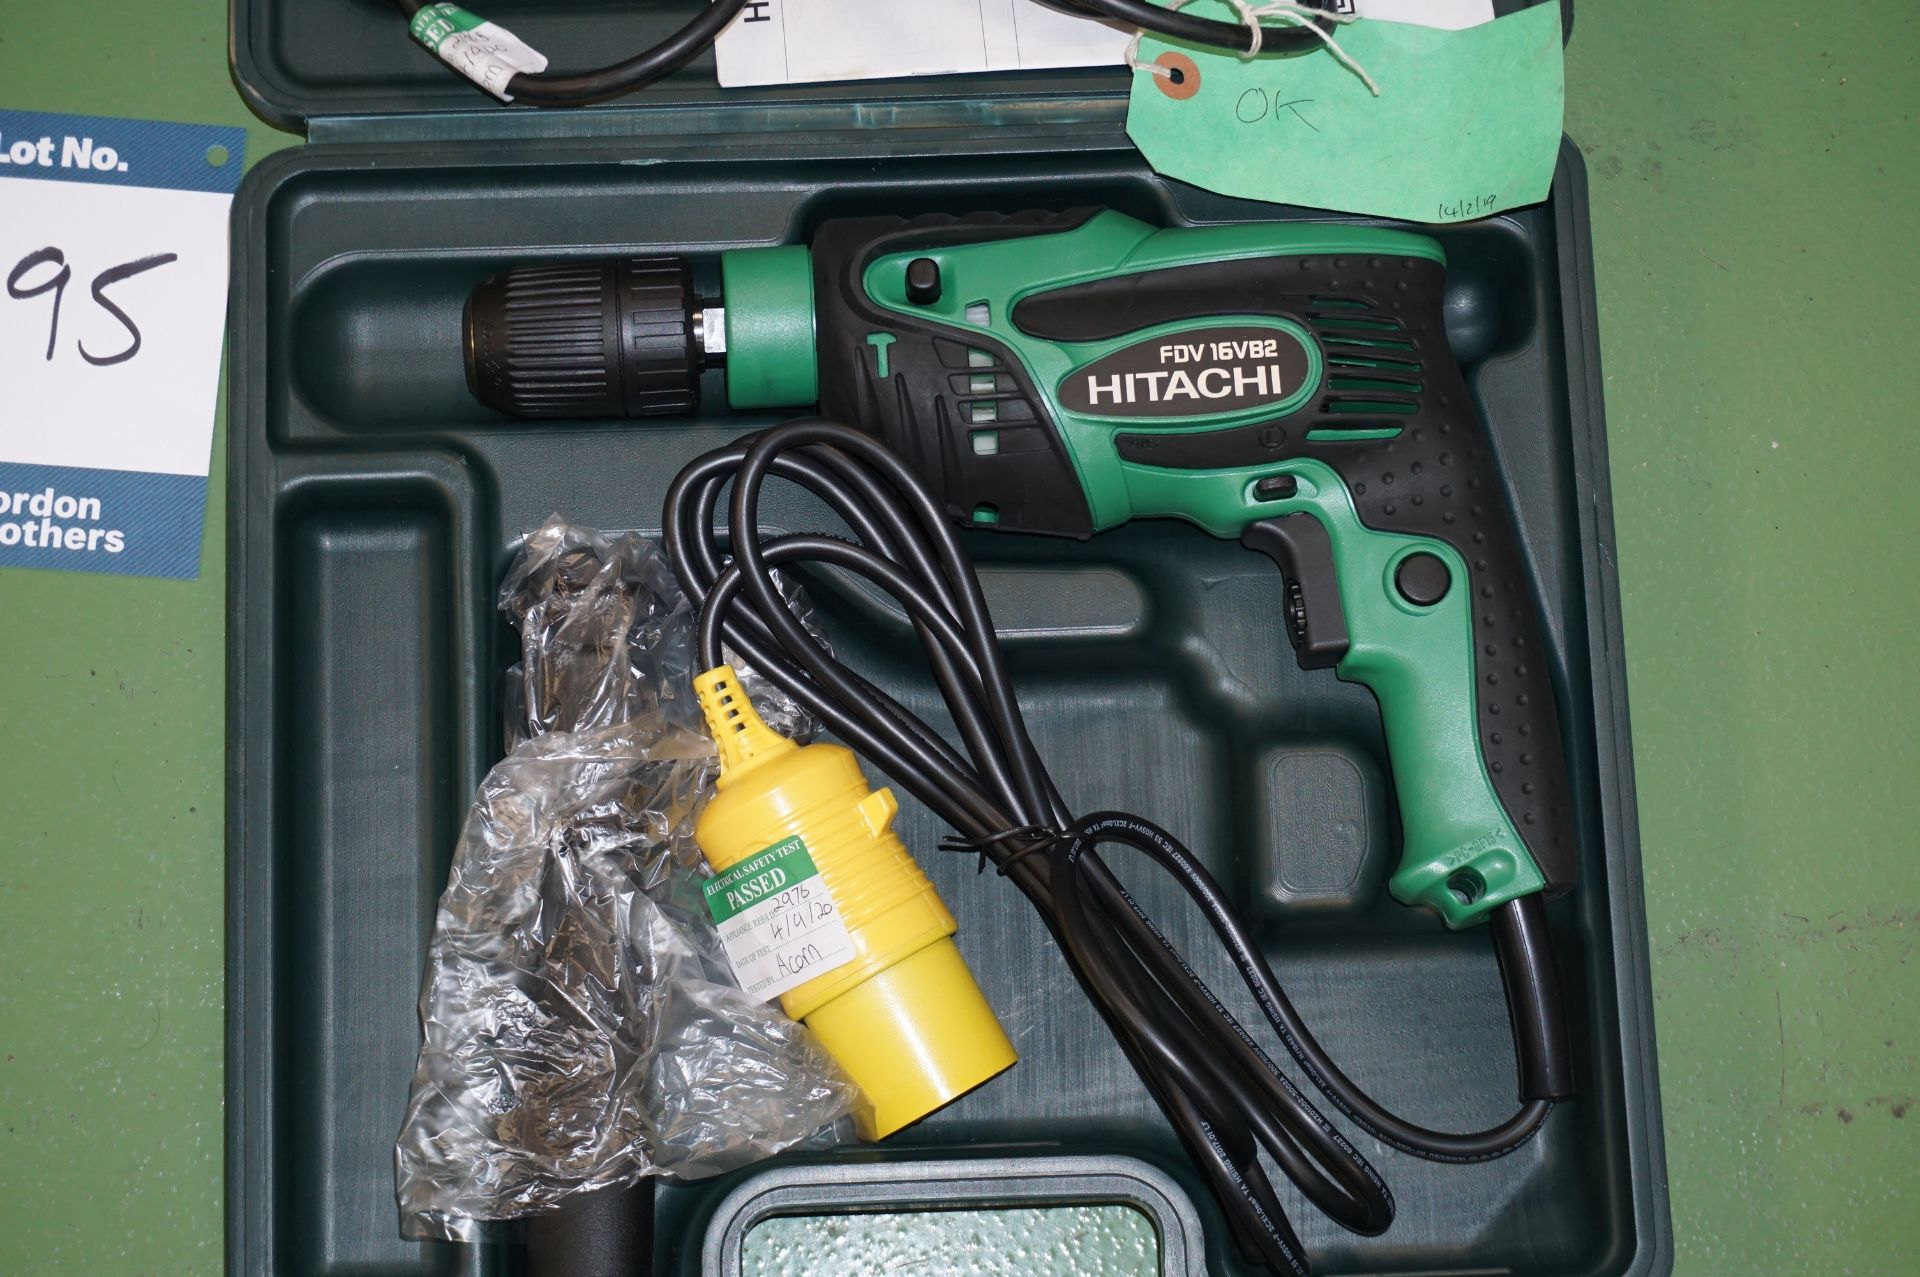 2 x Hitachi FDV16V82 110v impact drill with 1 x carry case - Image 2 of 3